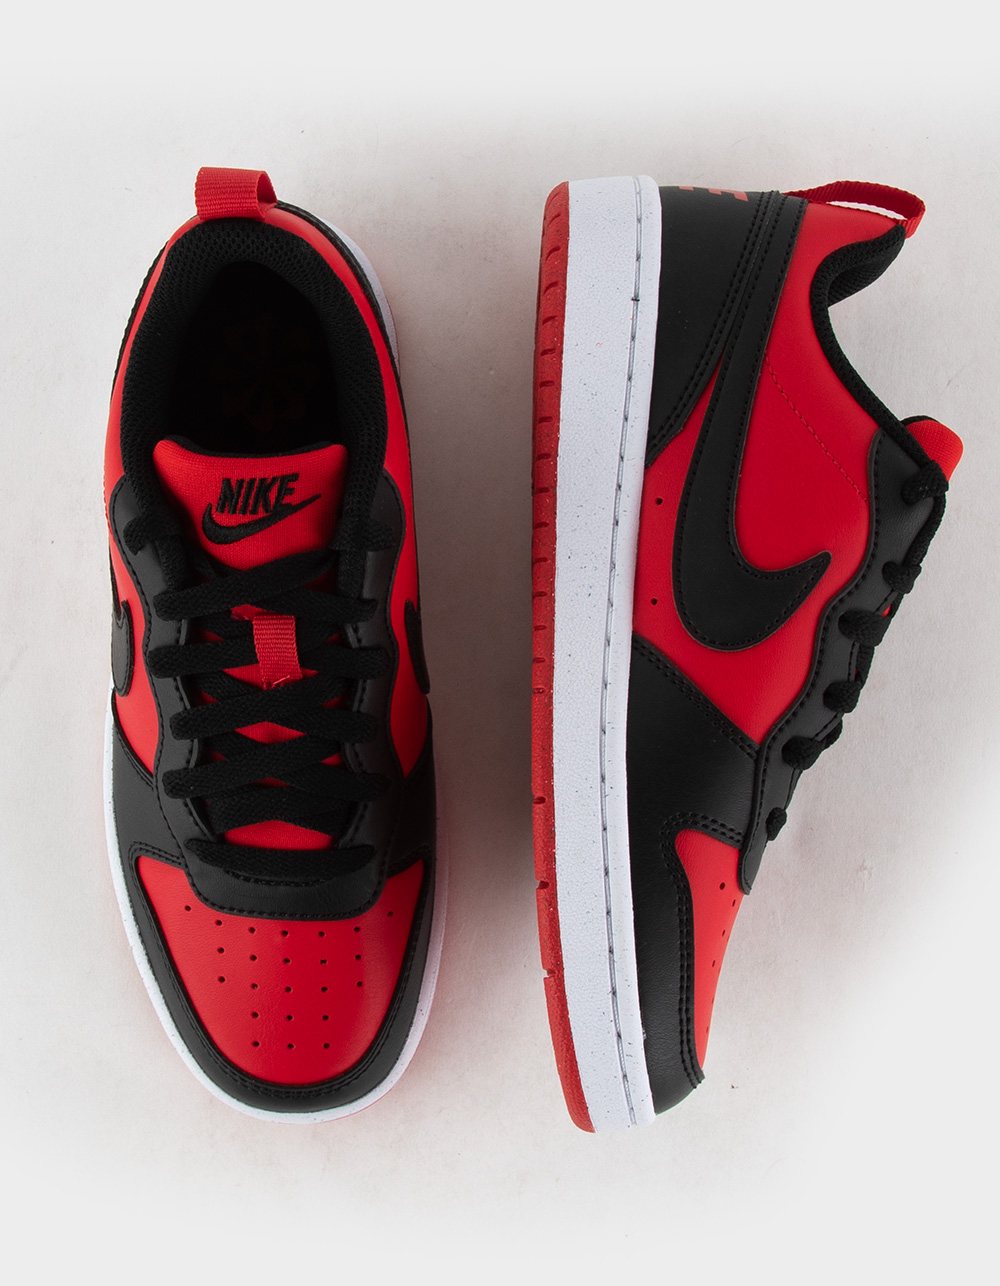 NIKE Court Borough | Recraft Tillys RED/BLK Low Kids - Shoes